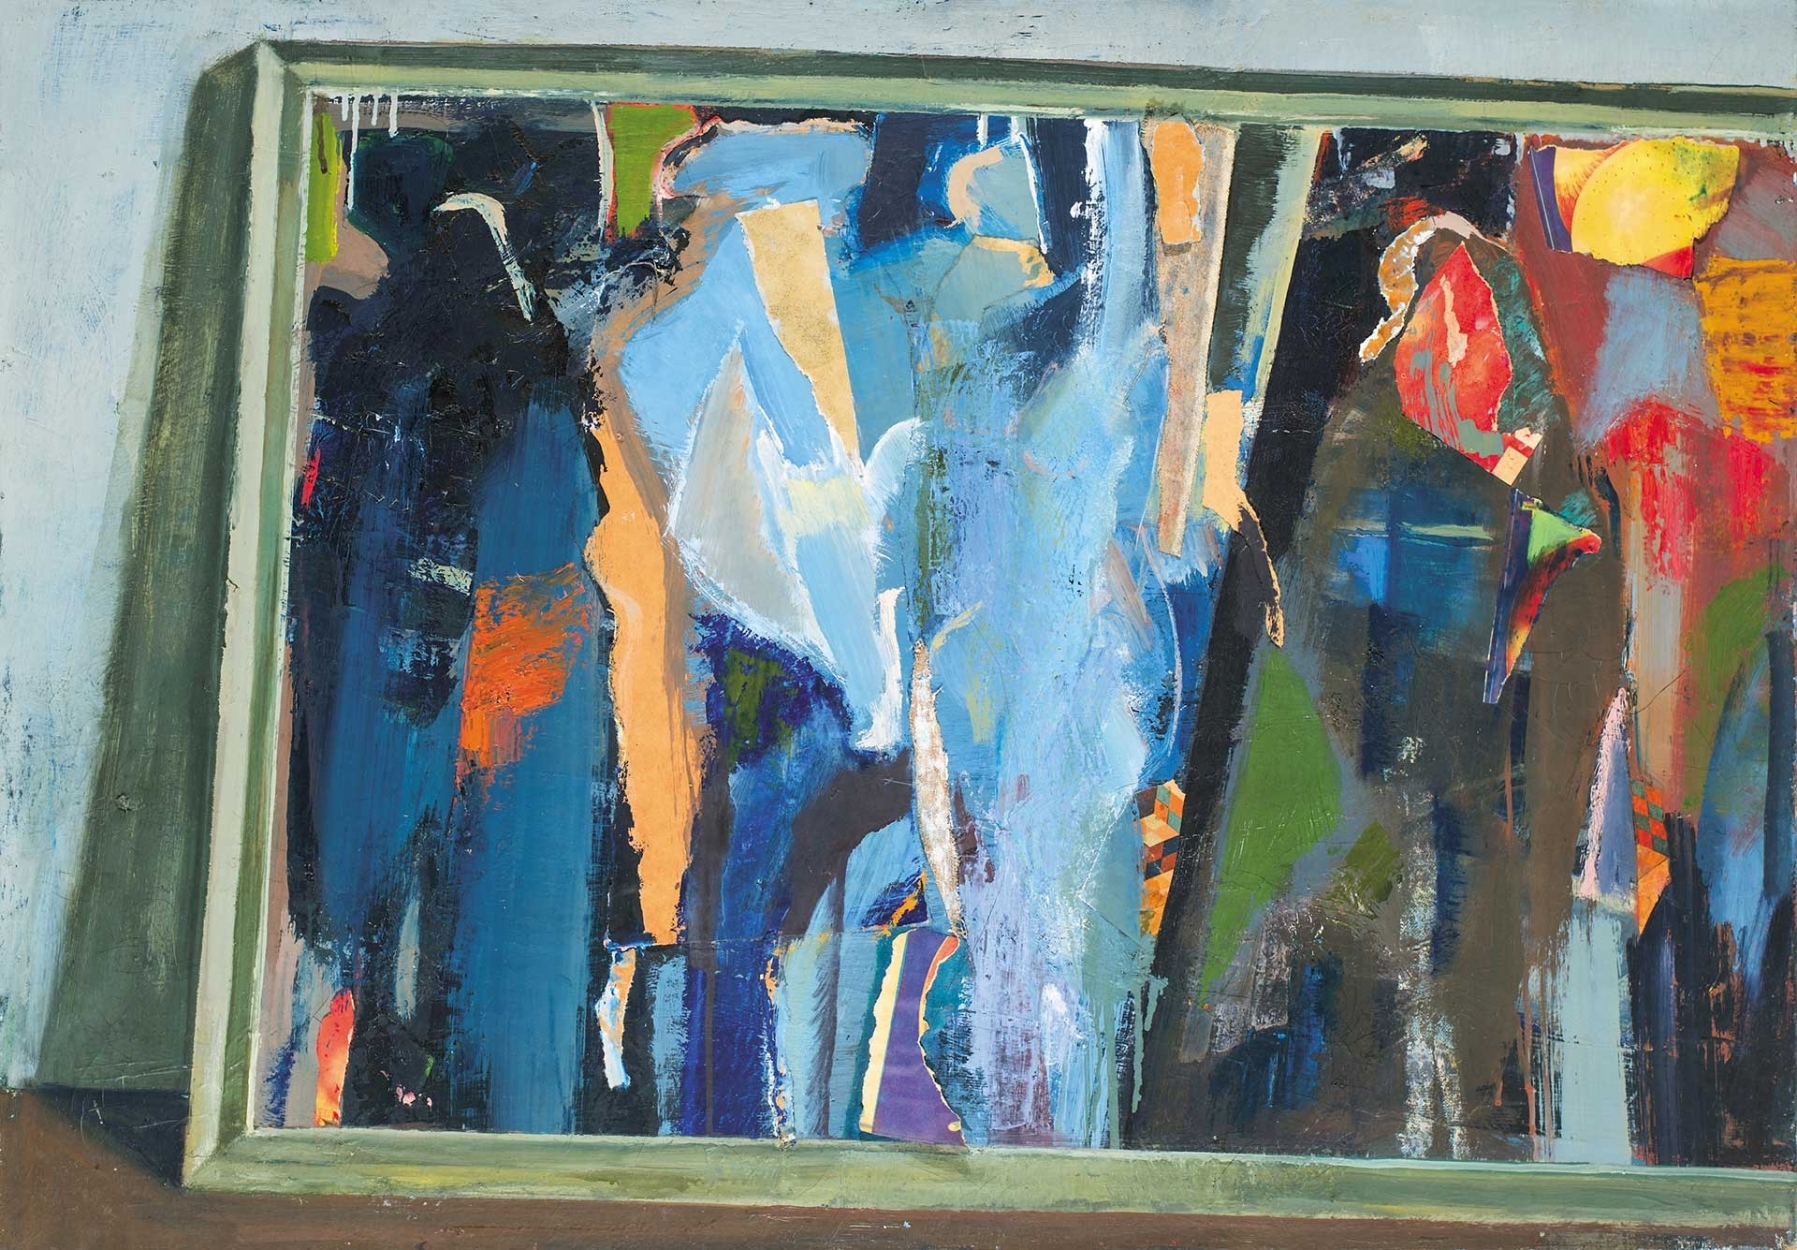 Tolvaly Ernő (1947-2008) Painting in Frame, 1975